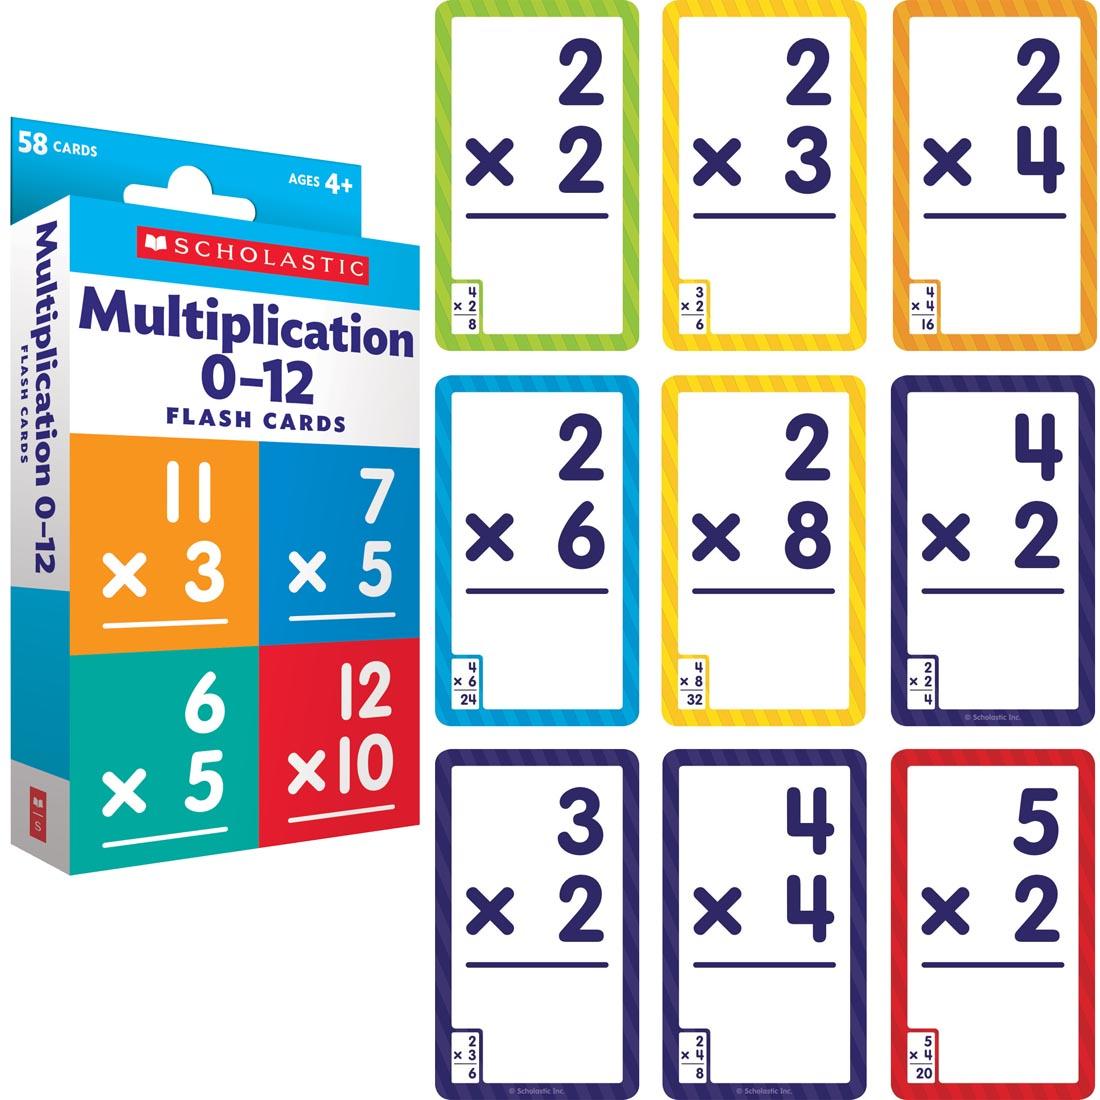 Box of Multiplication 0-12 Flash Cards by Scholastic next to 9 sample cards